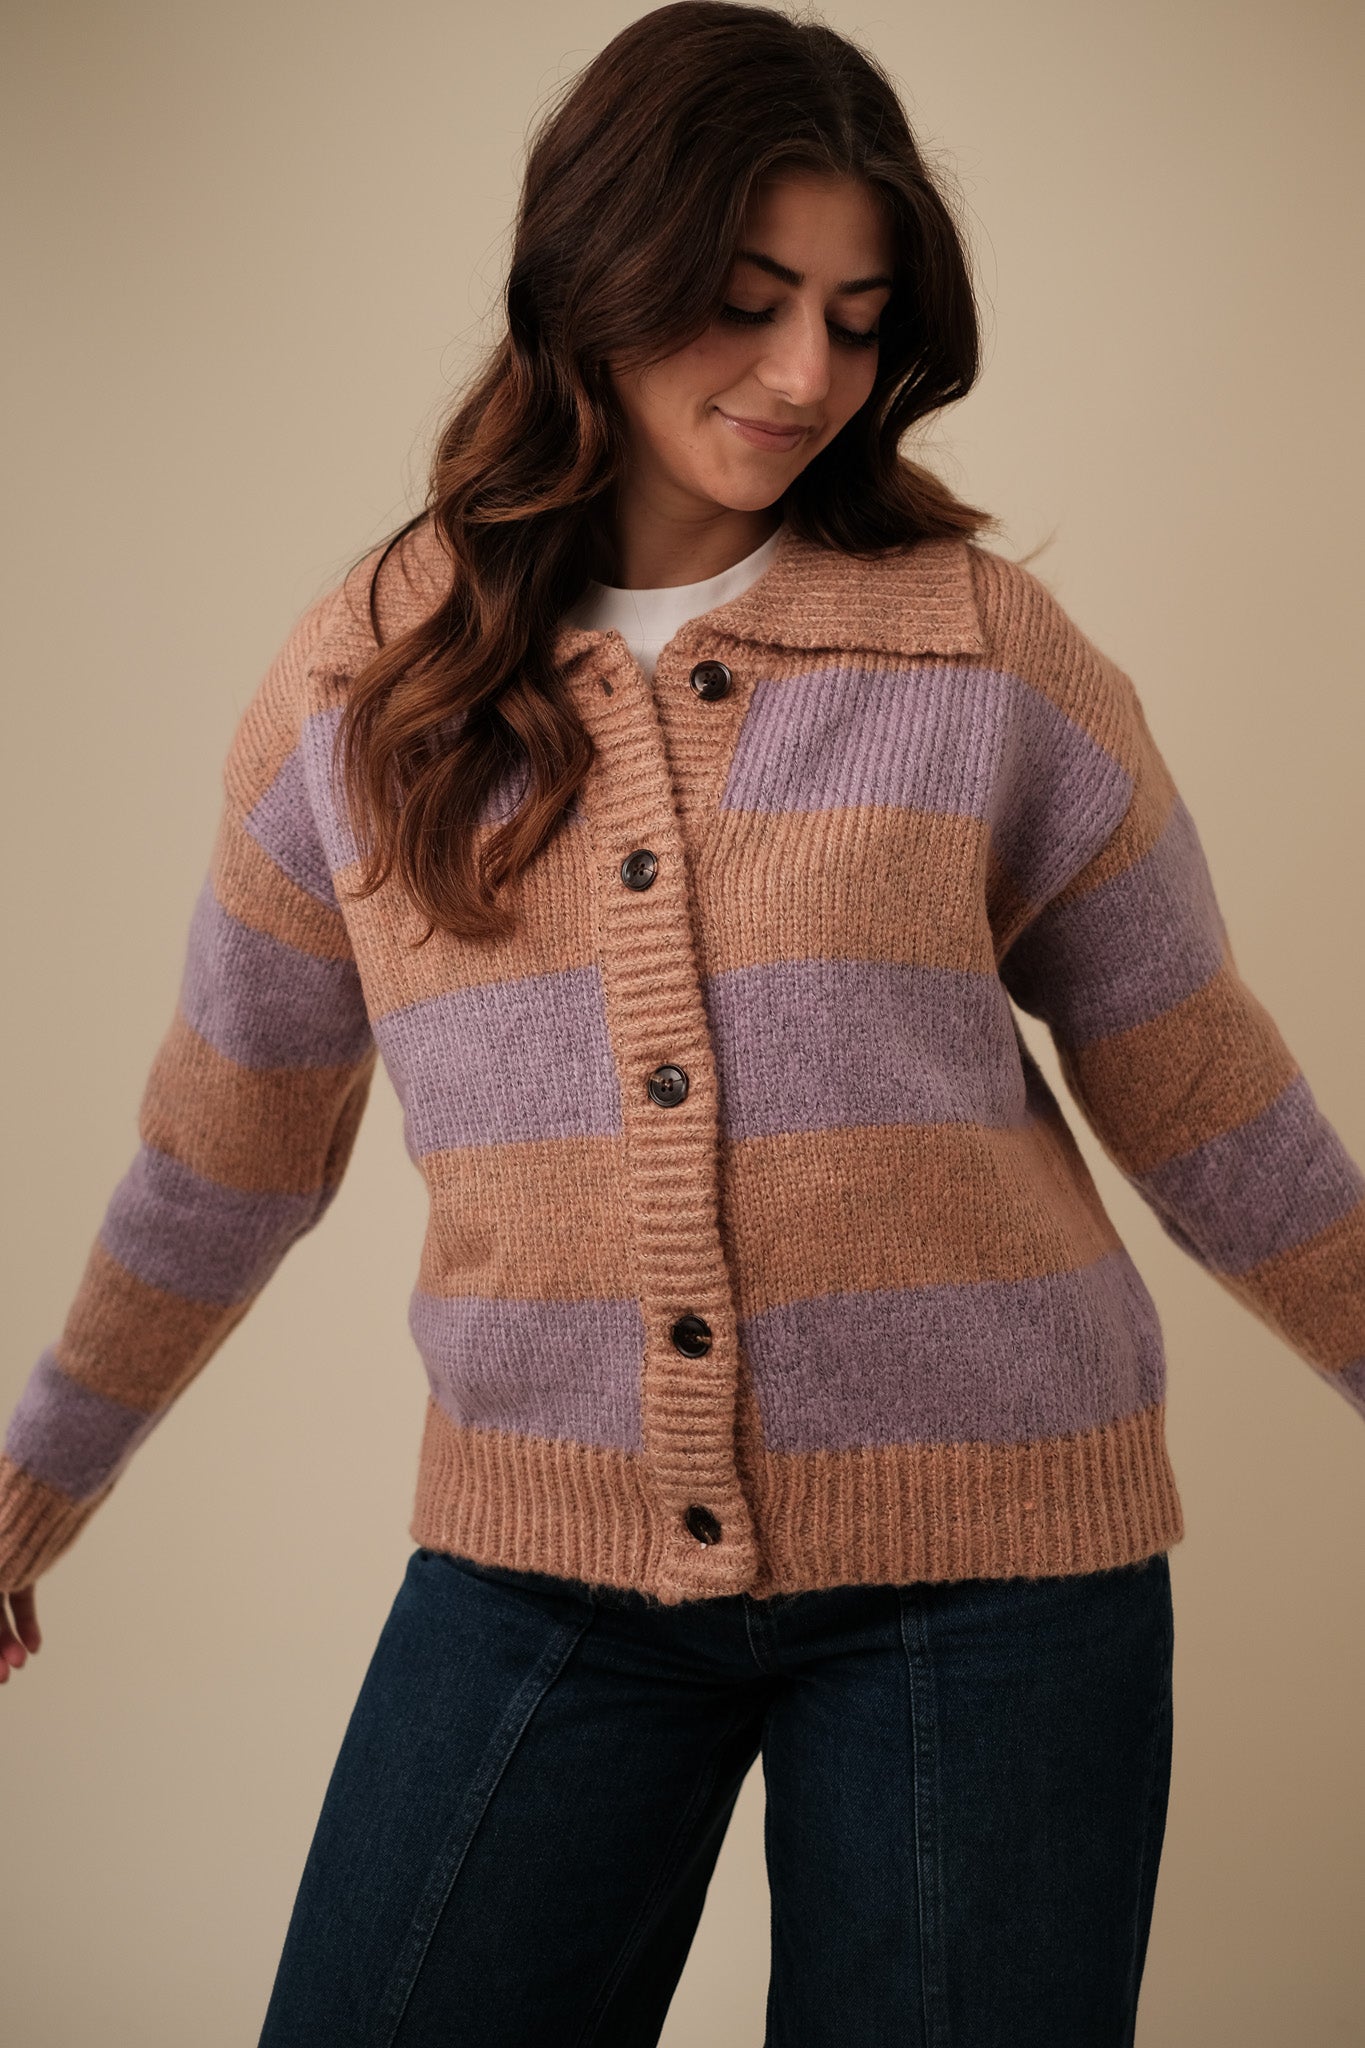 FRNCH Callie Periwinkle Striped Knit Buttoned Sweater (M)